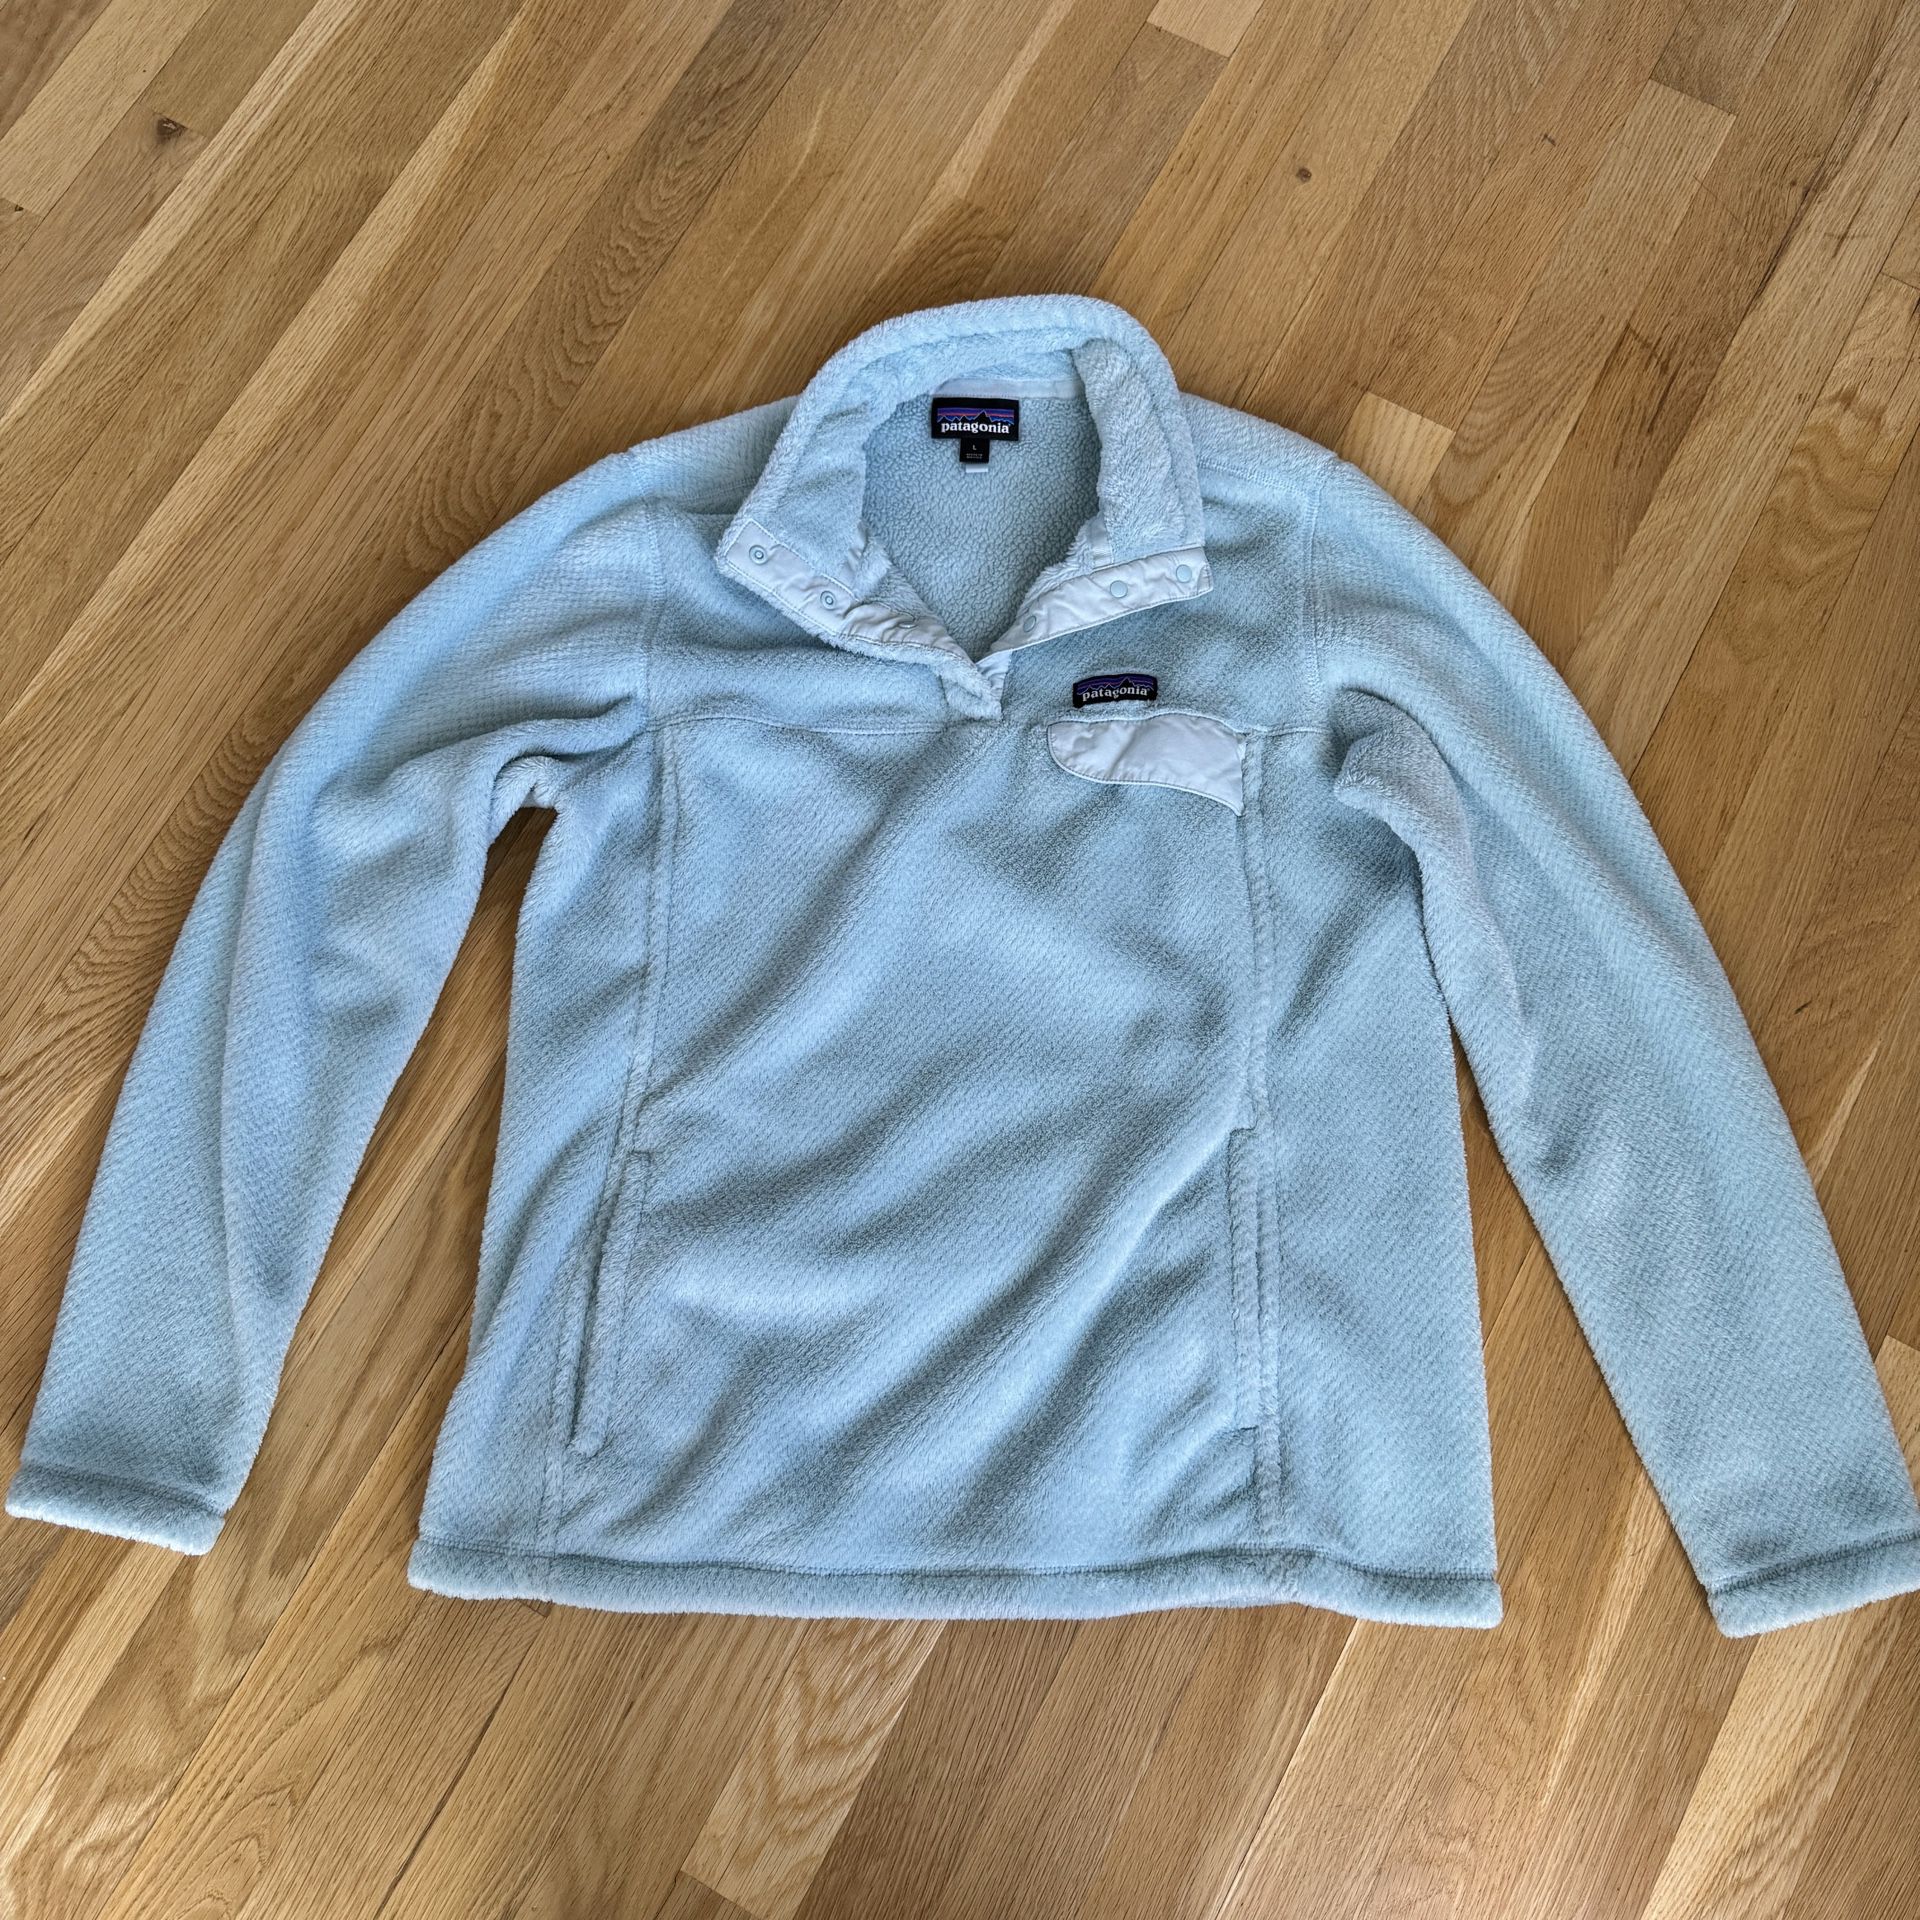 Women’s Patagonia Re-Tool Snap-T Fleece Pullover Size Large